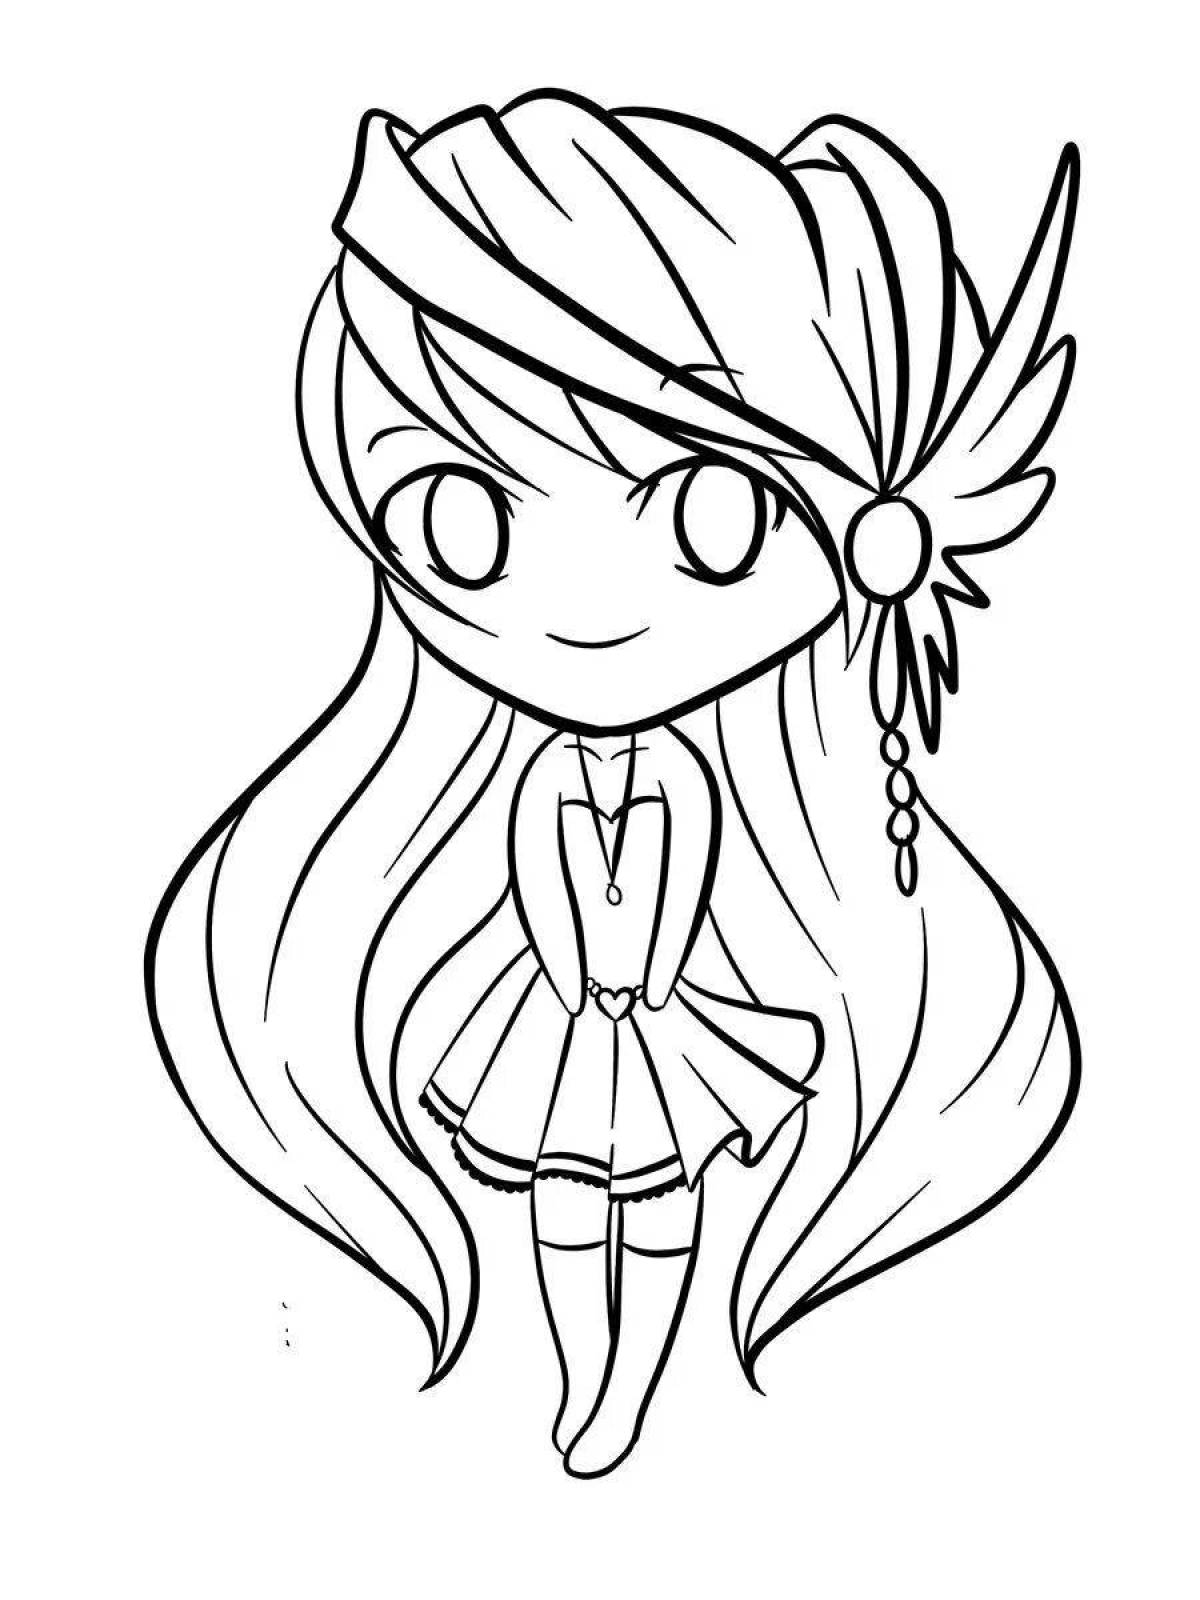 Sparkling anime light cute coloring page